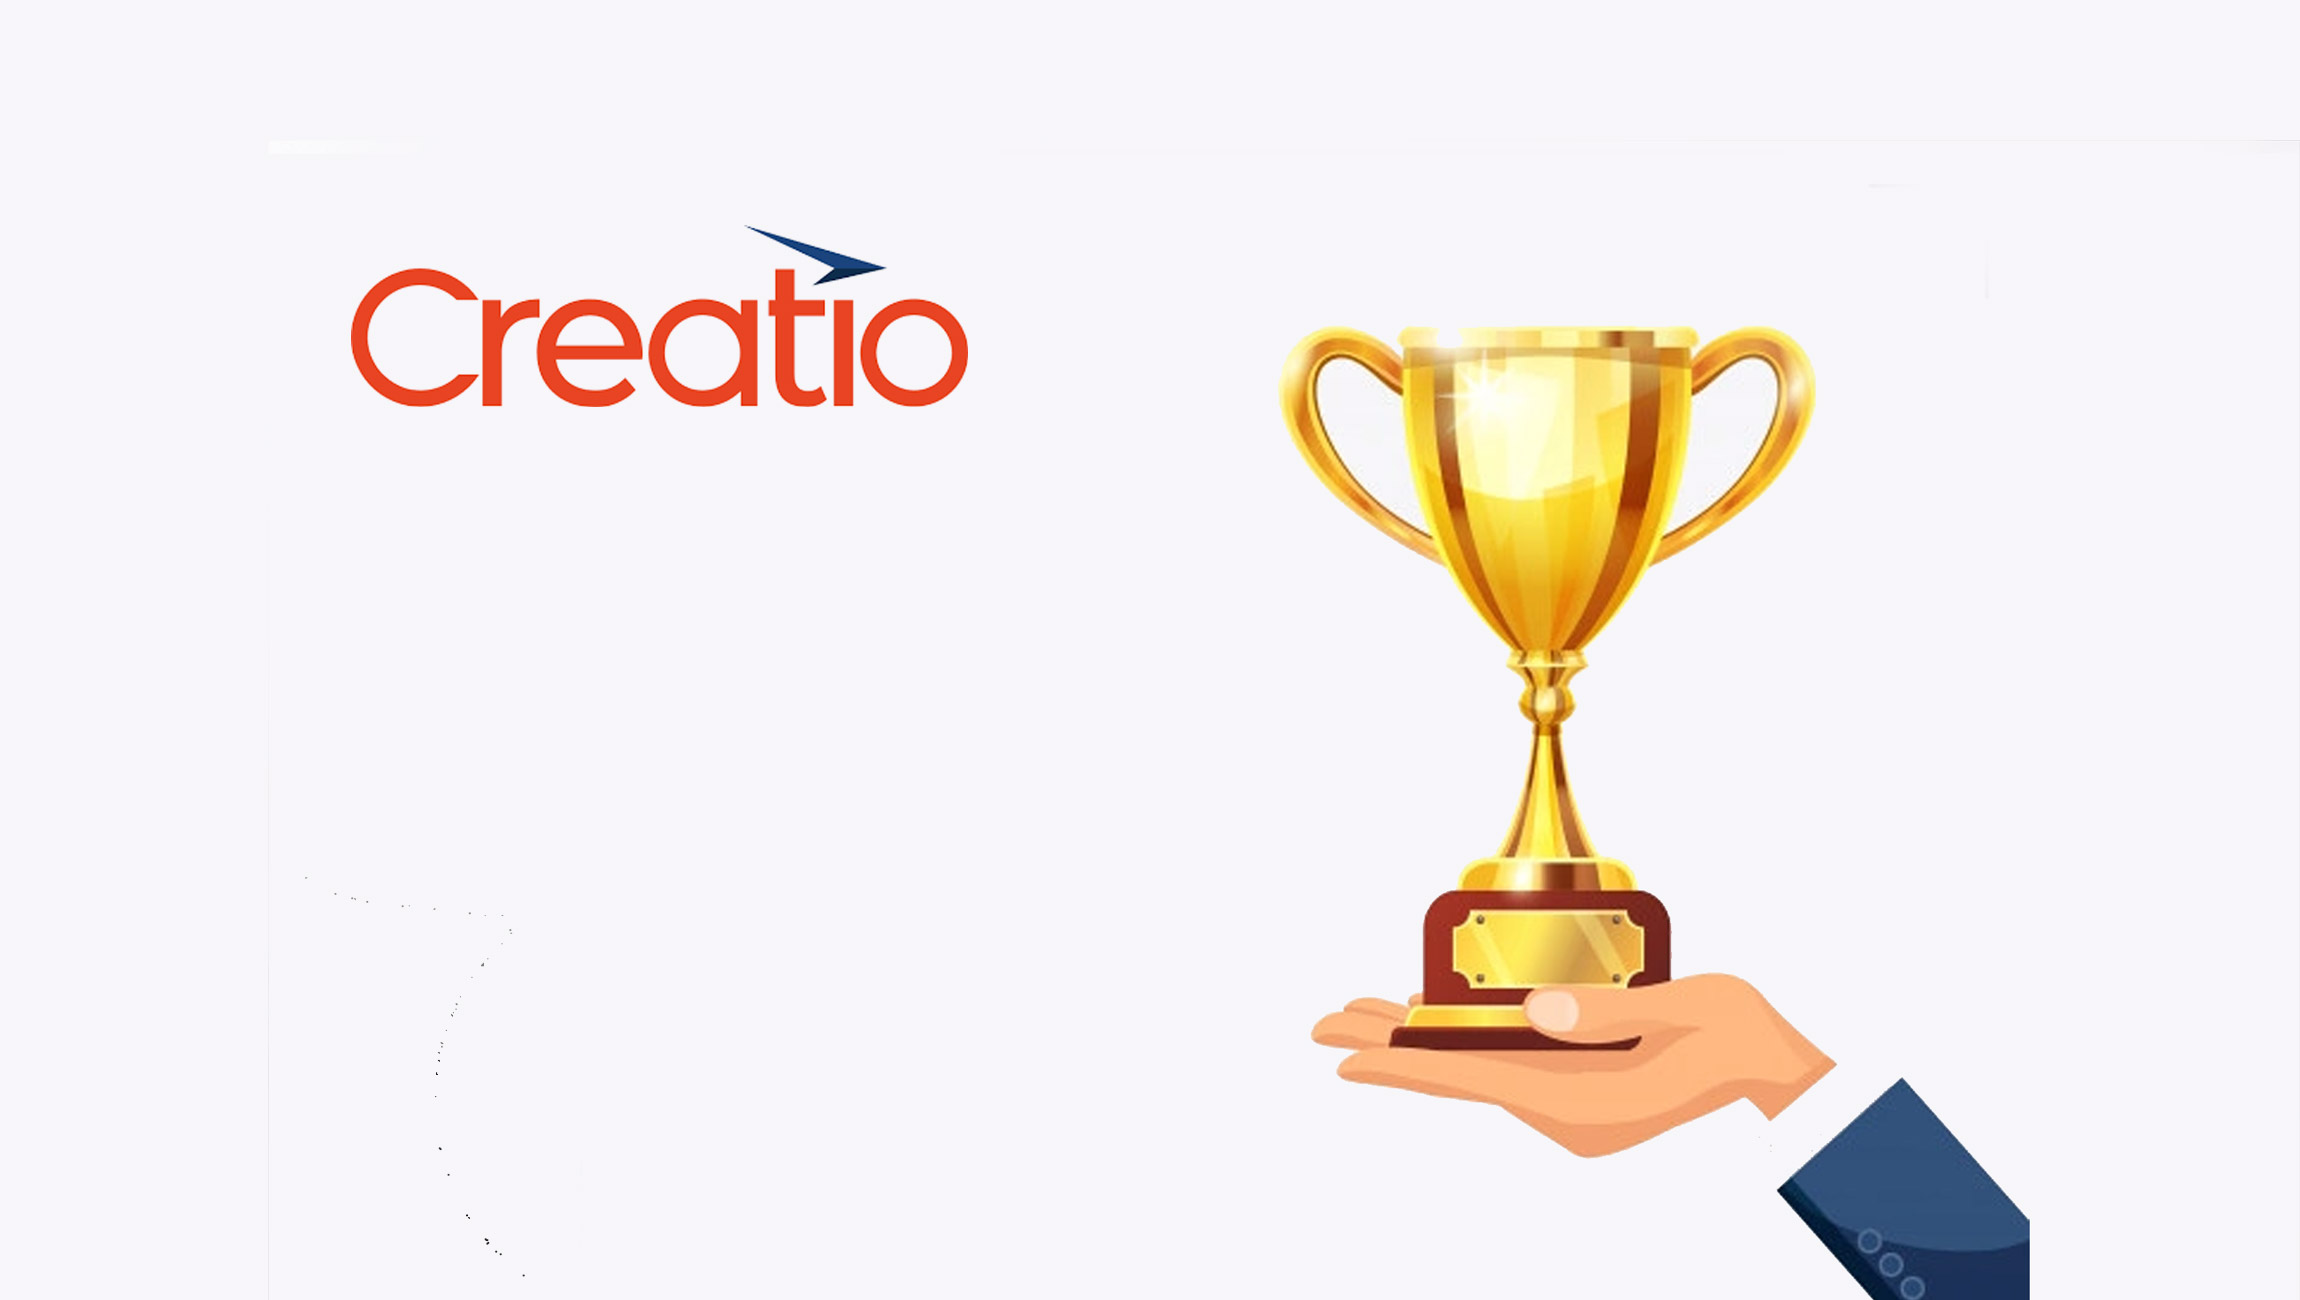 Creatio's Project Named a Finalist in The Digital Transformation & Operational Excellence Awards